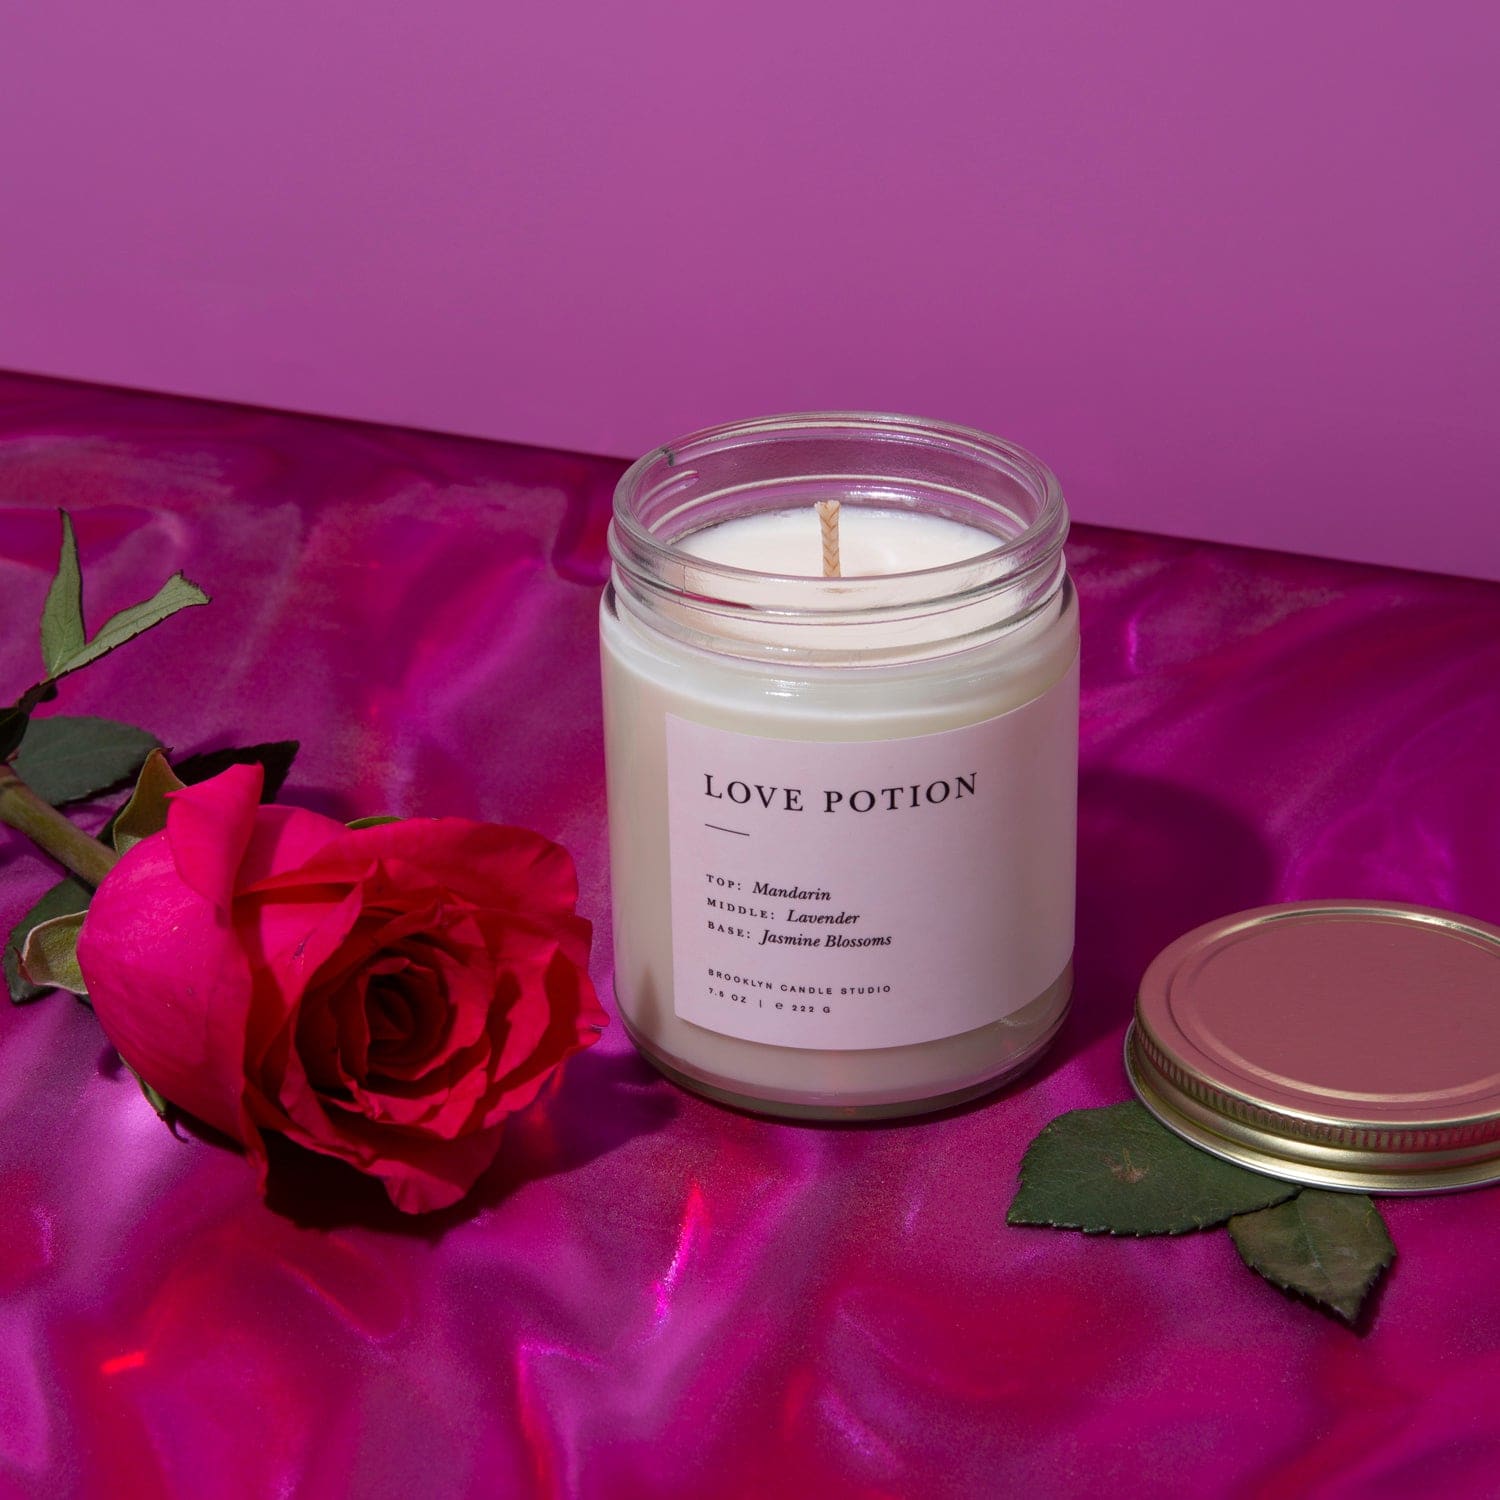 Love Potion Soy Wax Candle Brooklyn - Candle - Gift Guide - 